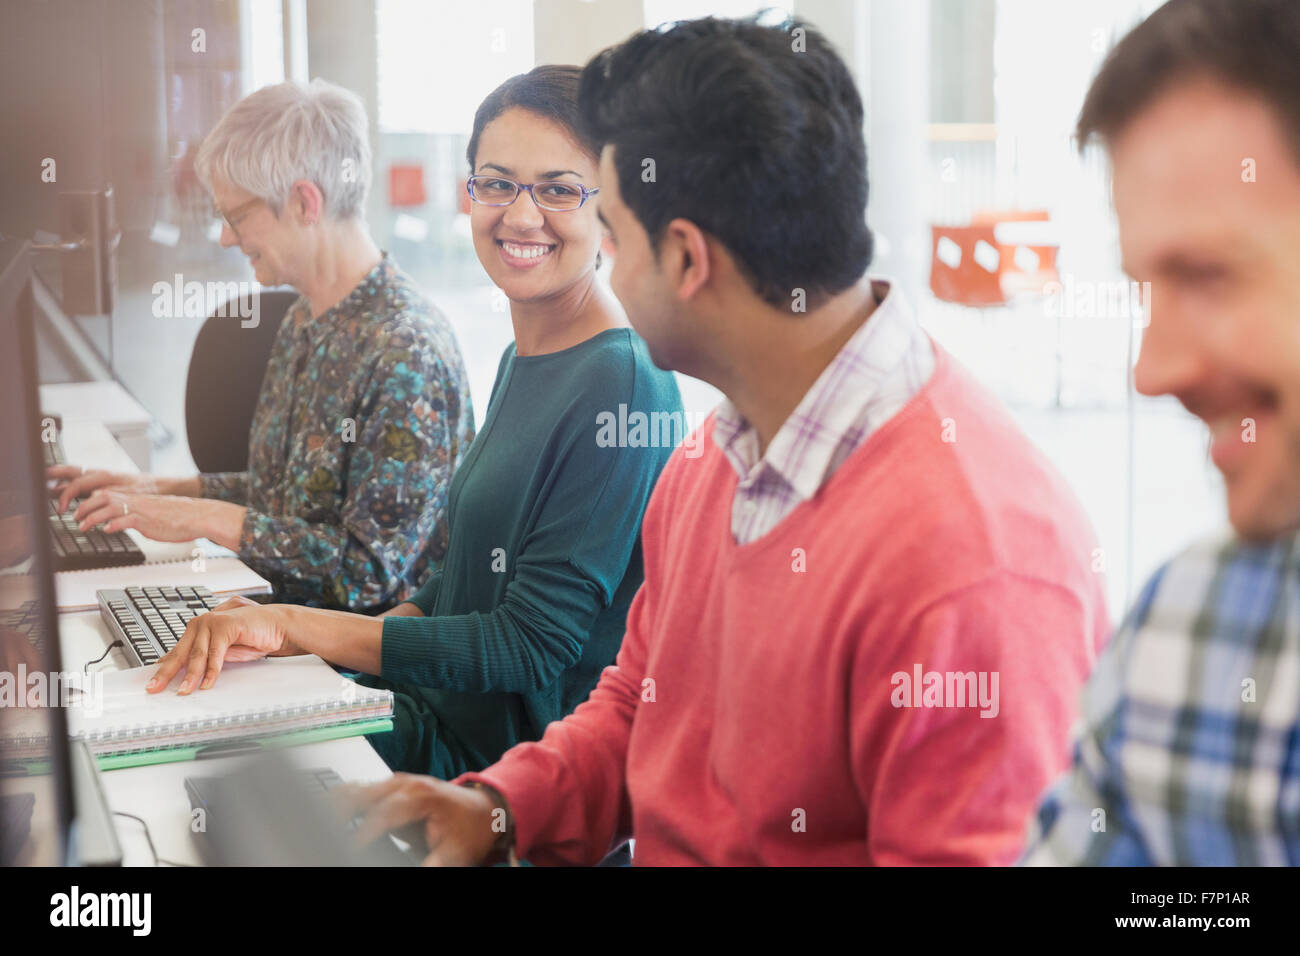 Smiling students talking at computers in adult education classroom Stock Photo